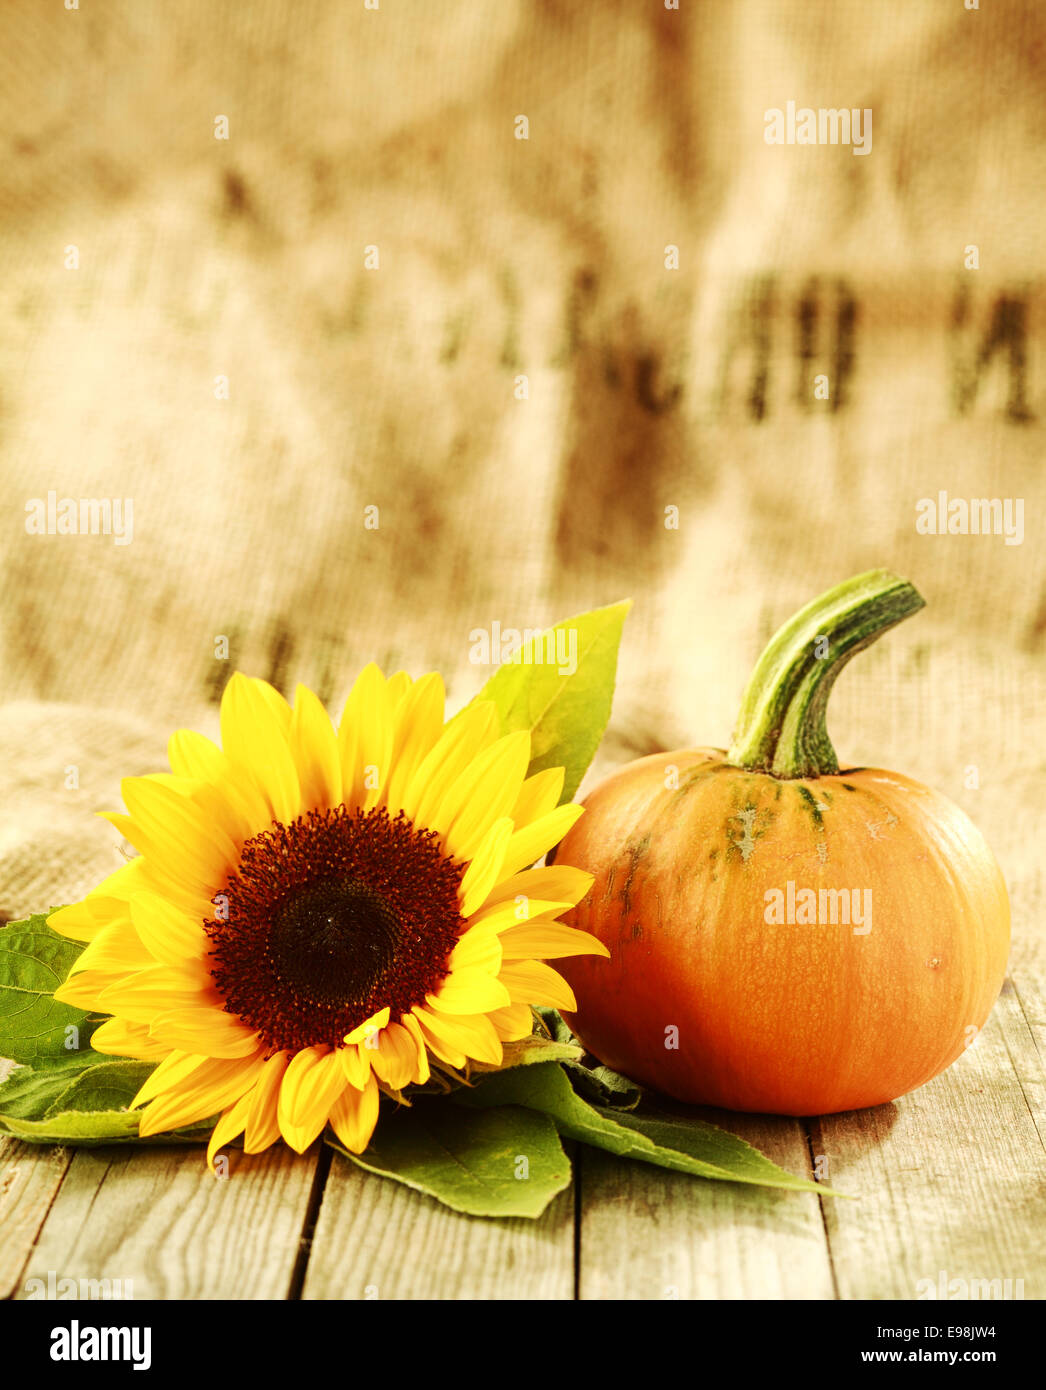 Thanksgiving or autumn background of a bright yellow sunflower and fresh pumpkin or orange squash on rustic wooden boards with a textured brown and beige background with large copyspace Stock Photo